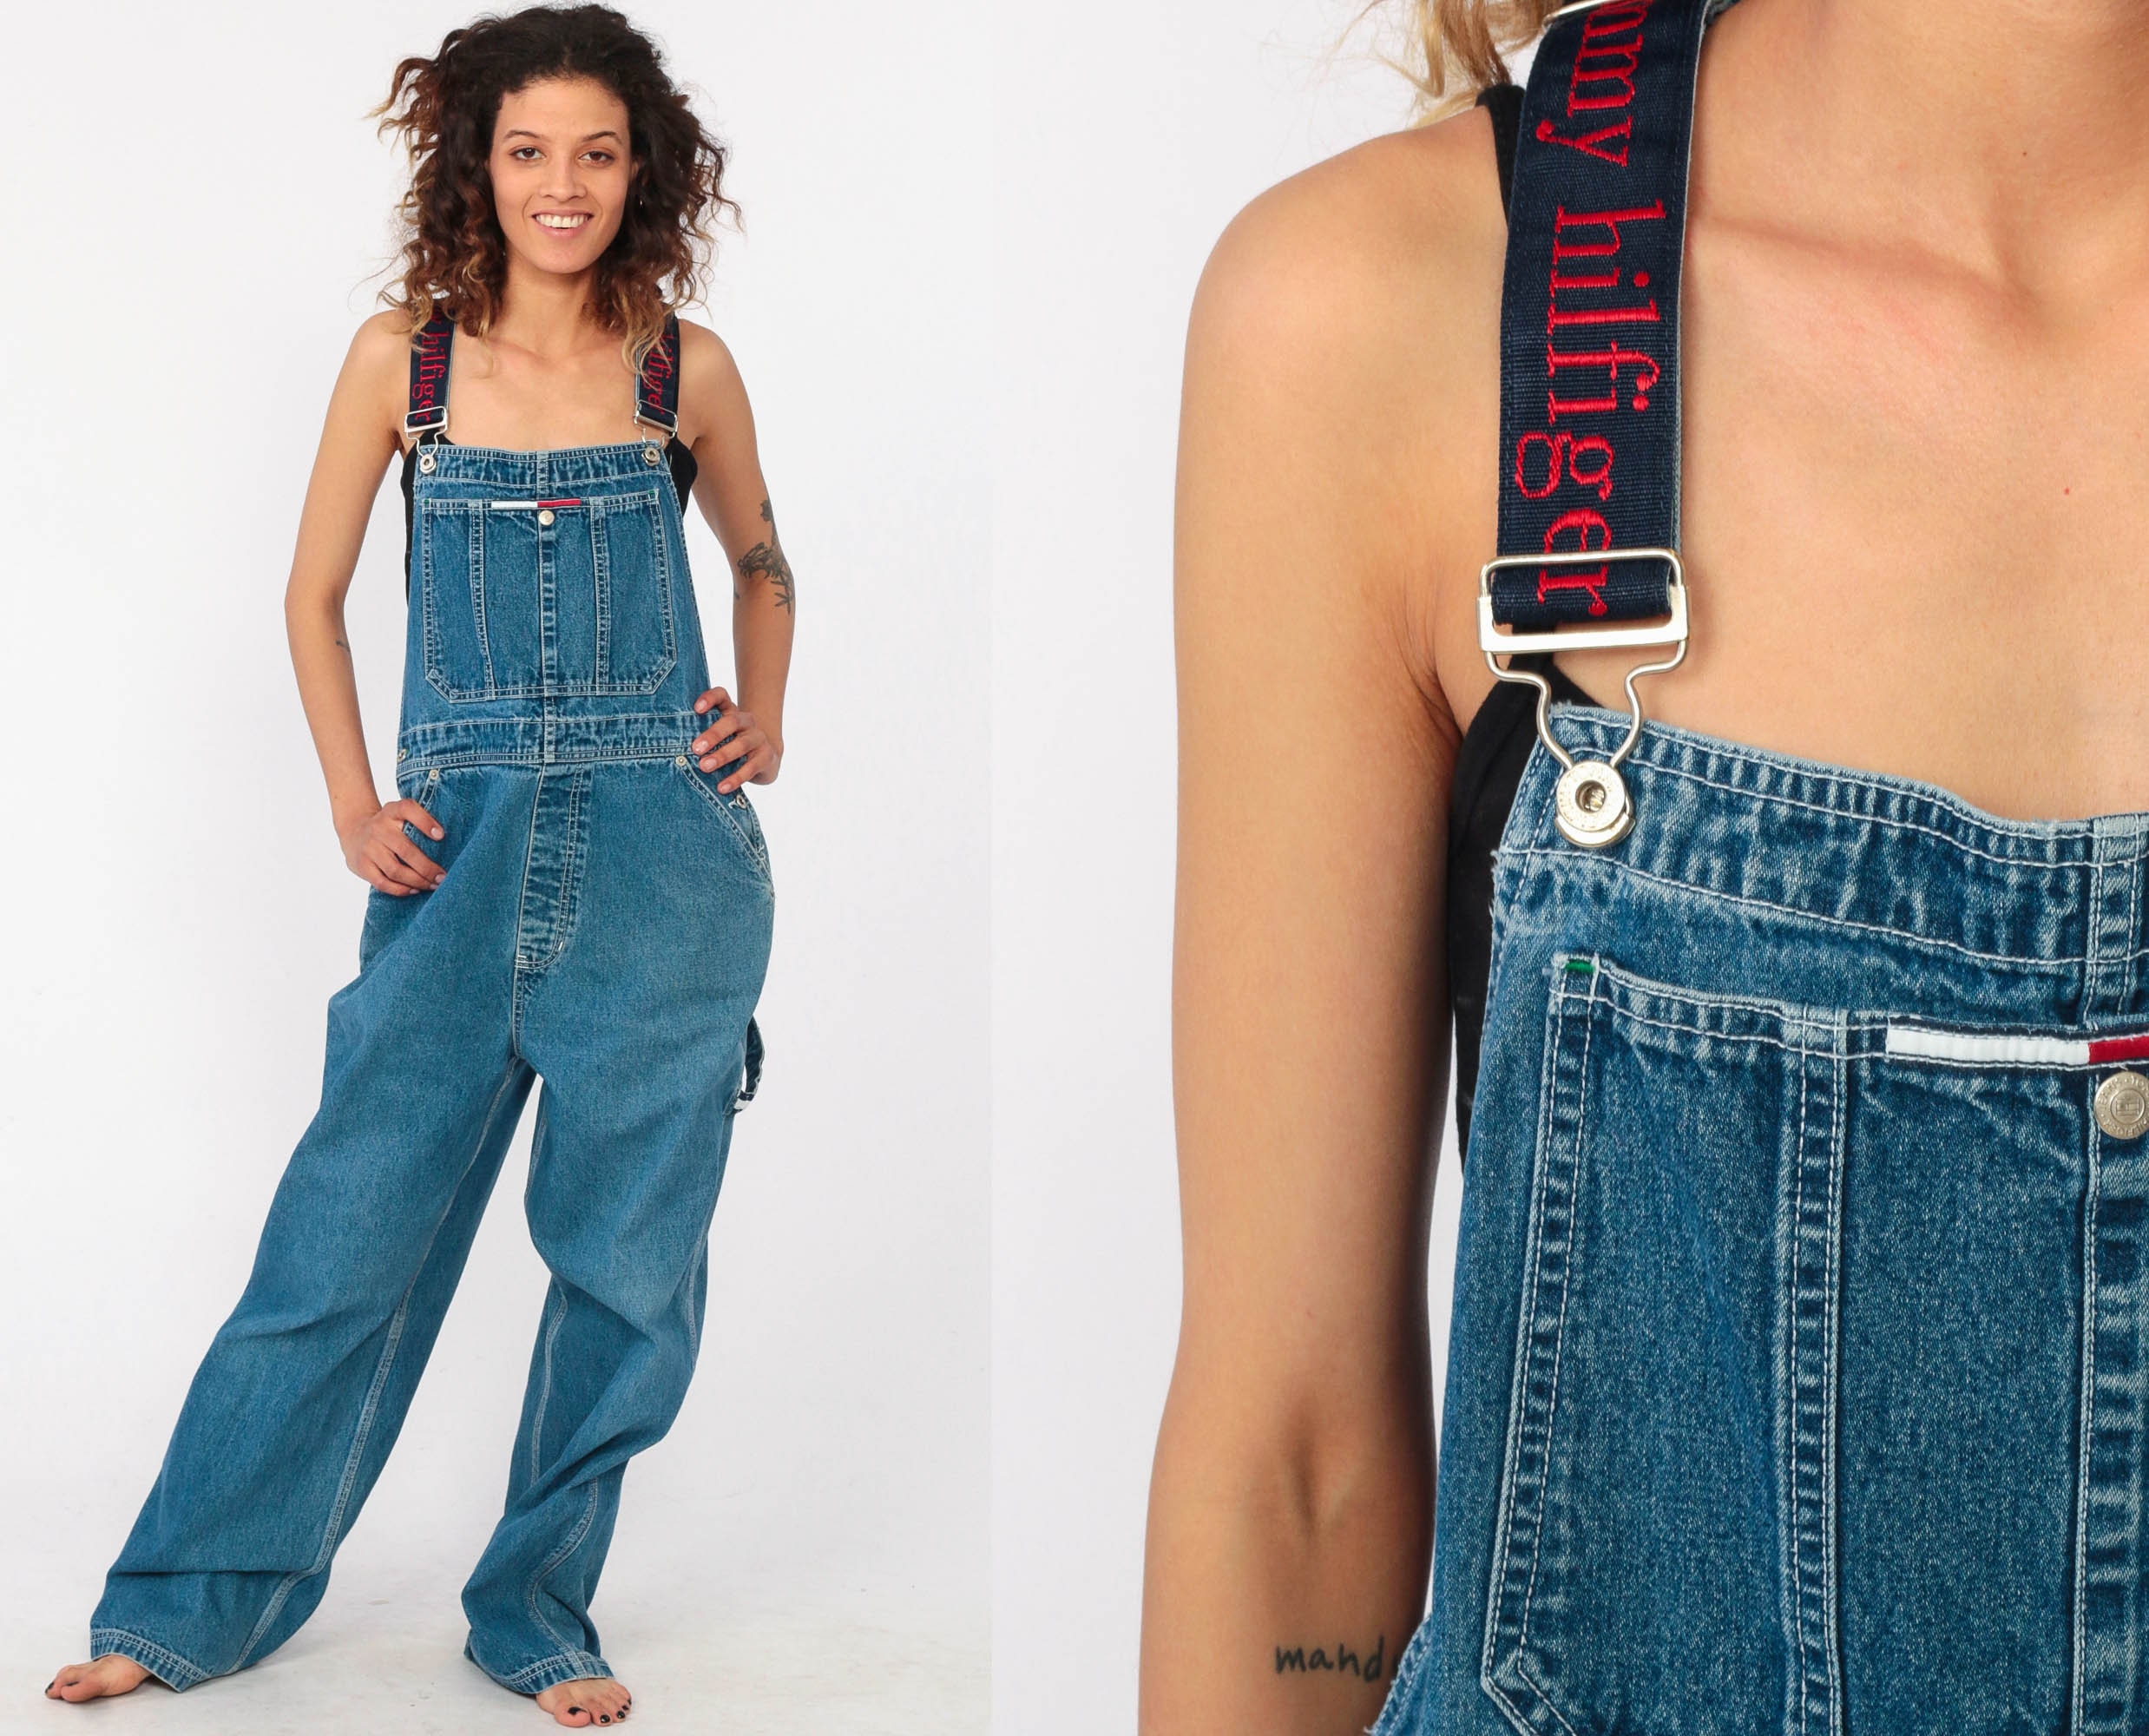 Hilfiger Overalls Pants 90s Streetwear Denim SPELLOUT Pants Bib Baggy Spell Out Long Jean Pants 1990s Hipster Vintage Dungarees Medium